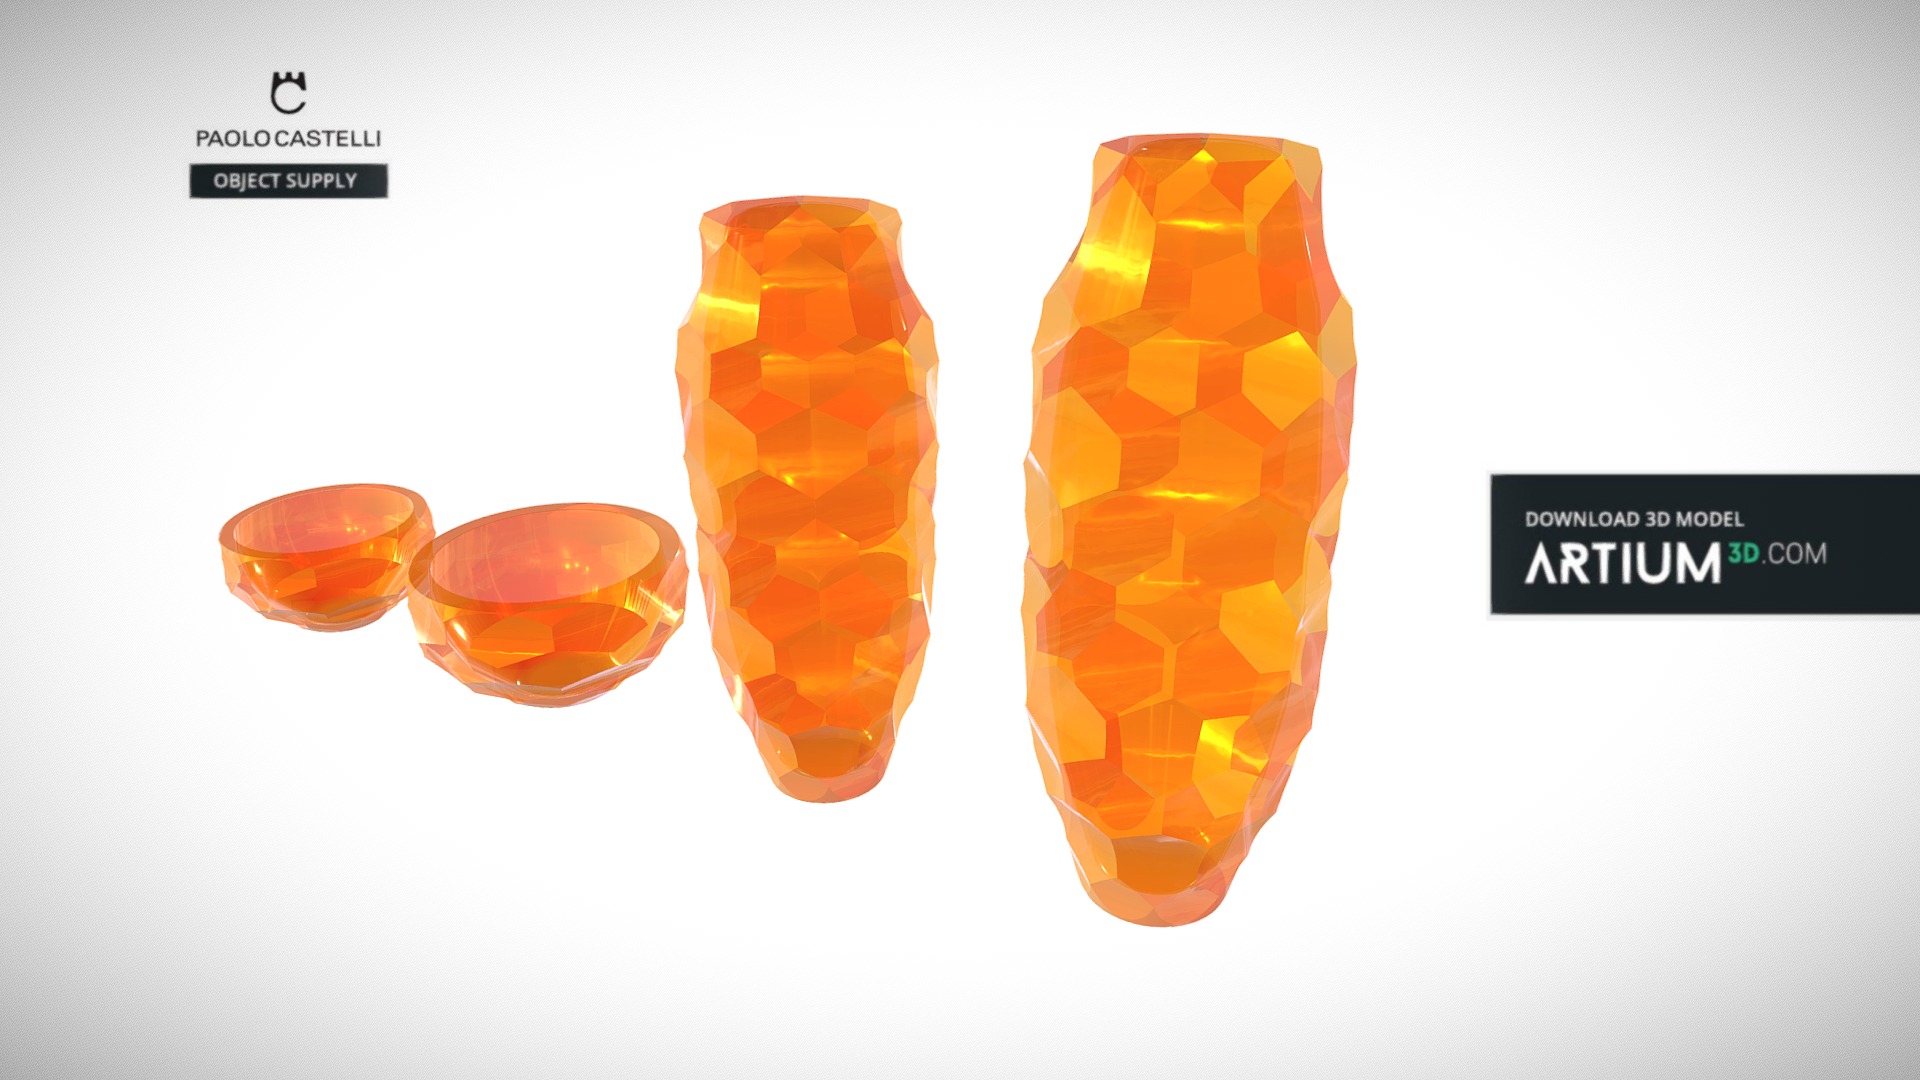 3D model Murano Vases from Paolo Castelli - This is a 3D model of the Murano Vases from Paolo Castelli. The 3D model is about a group of orange liquid.